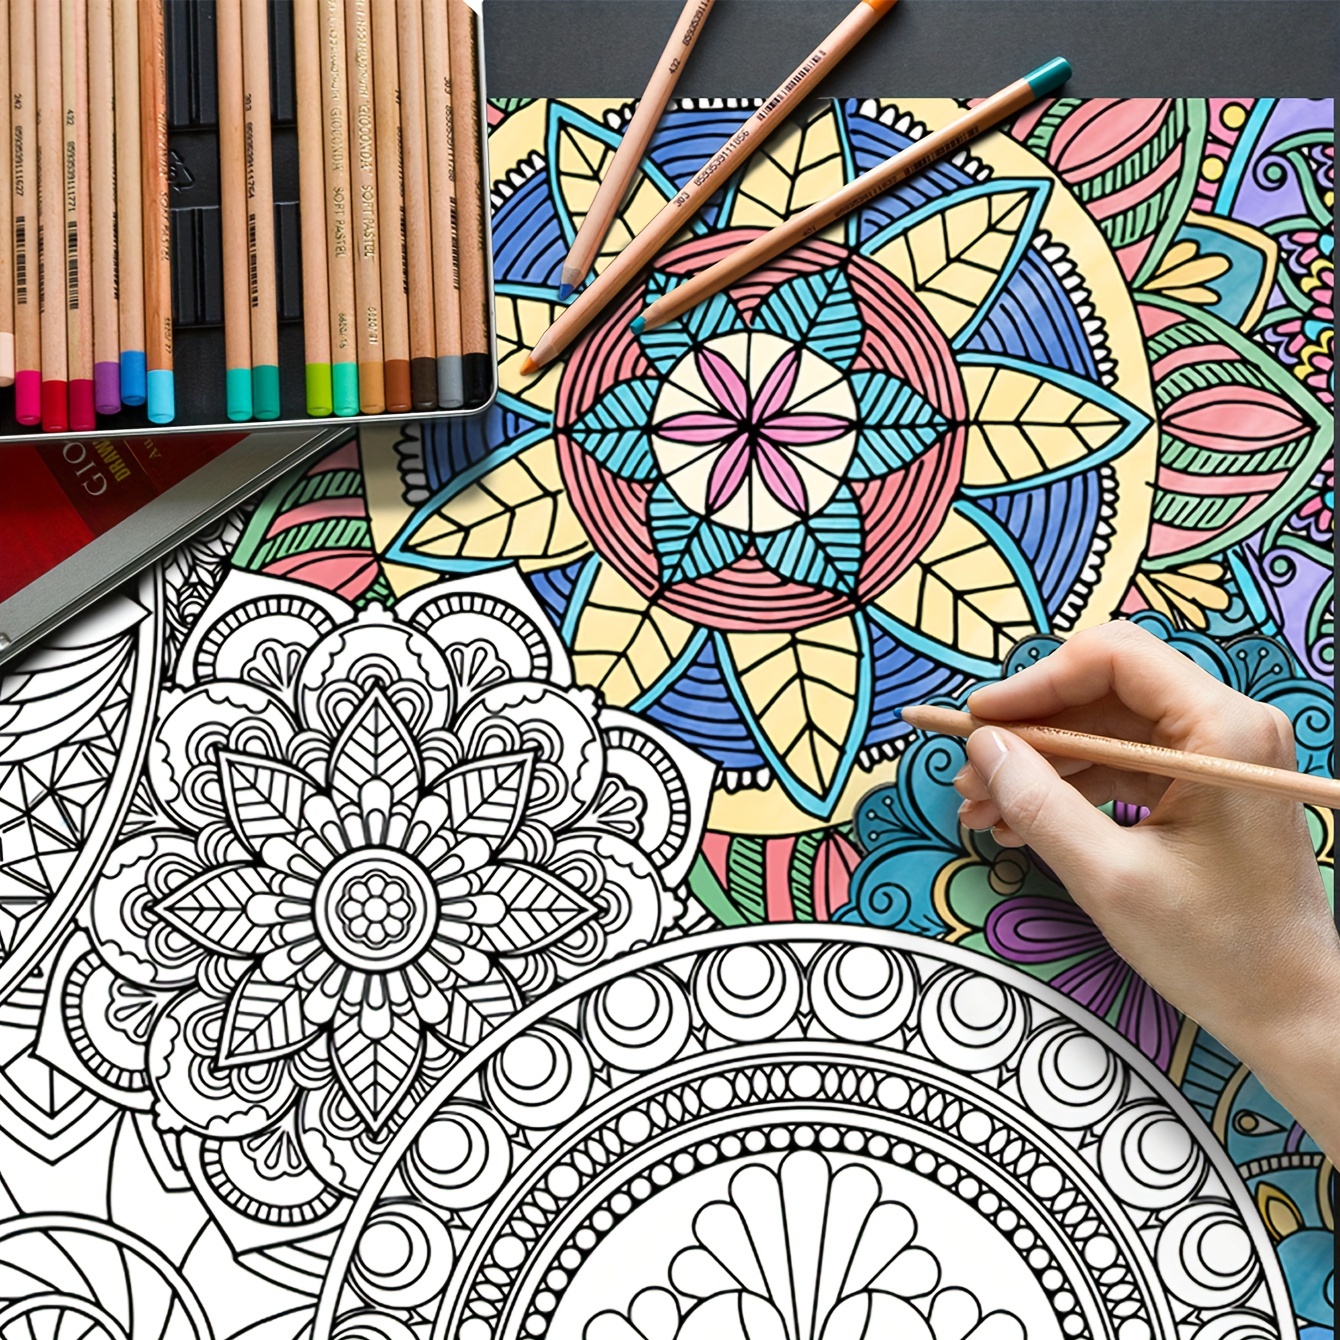 BZaber Giant Mandala Coloring Posters Wall Art Decor, Jumbo Coloring Sheets  for Kids Adults - Great for Bedroom, Dining Room, Classroom Decoration